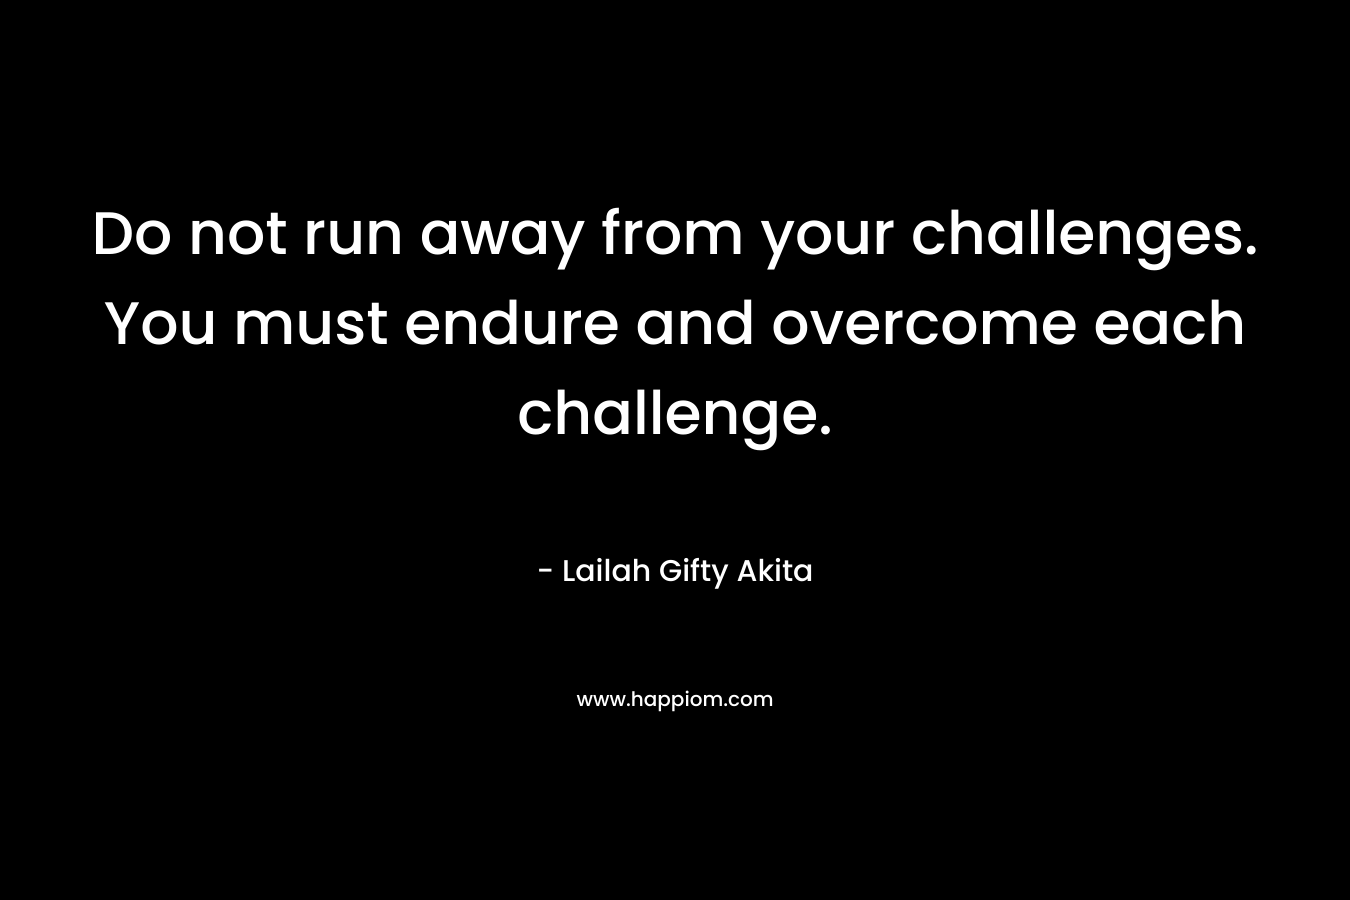 Do not run away from your challenges. You must endure and overcome each challenge.